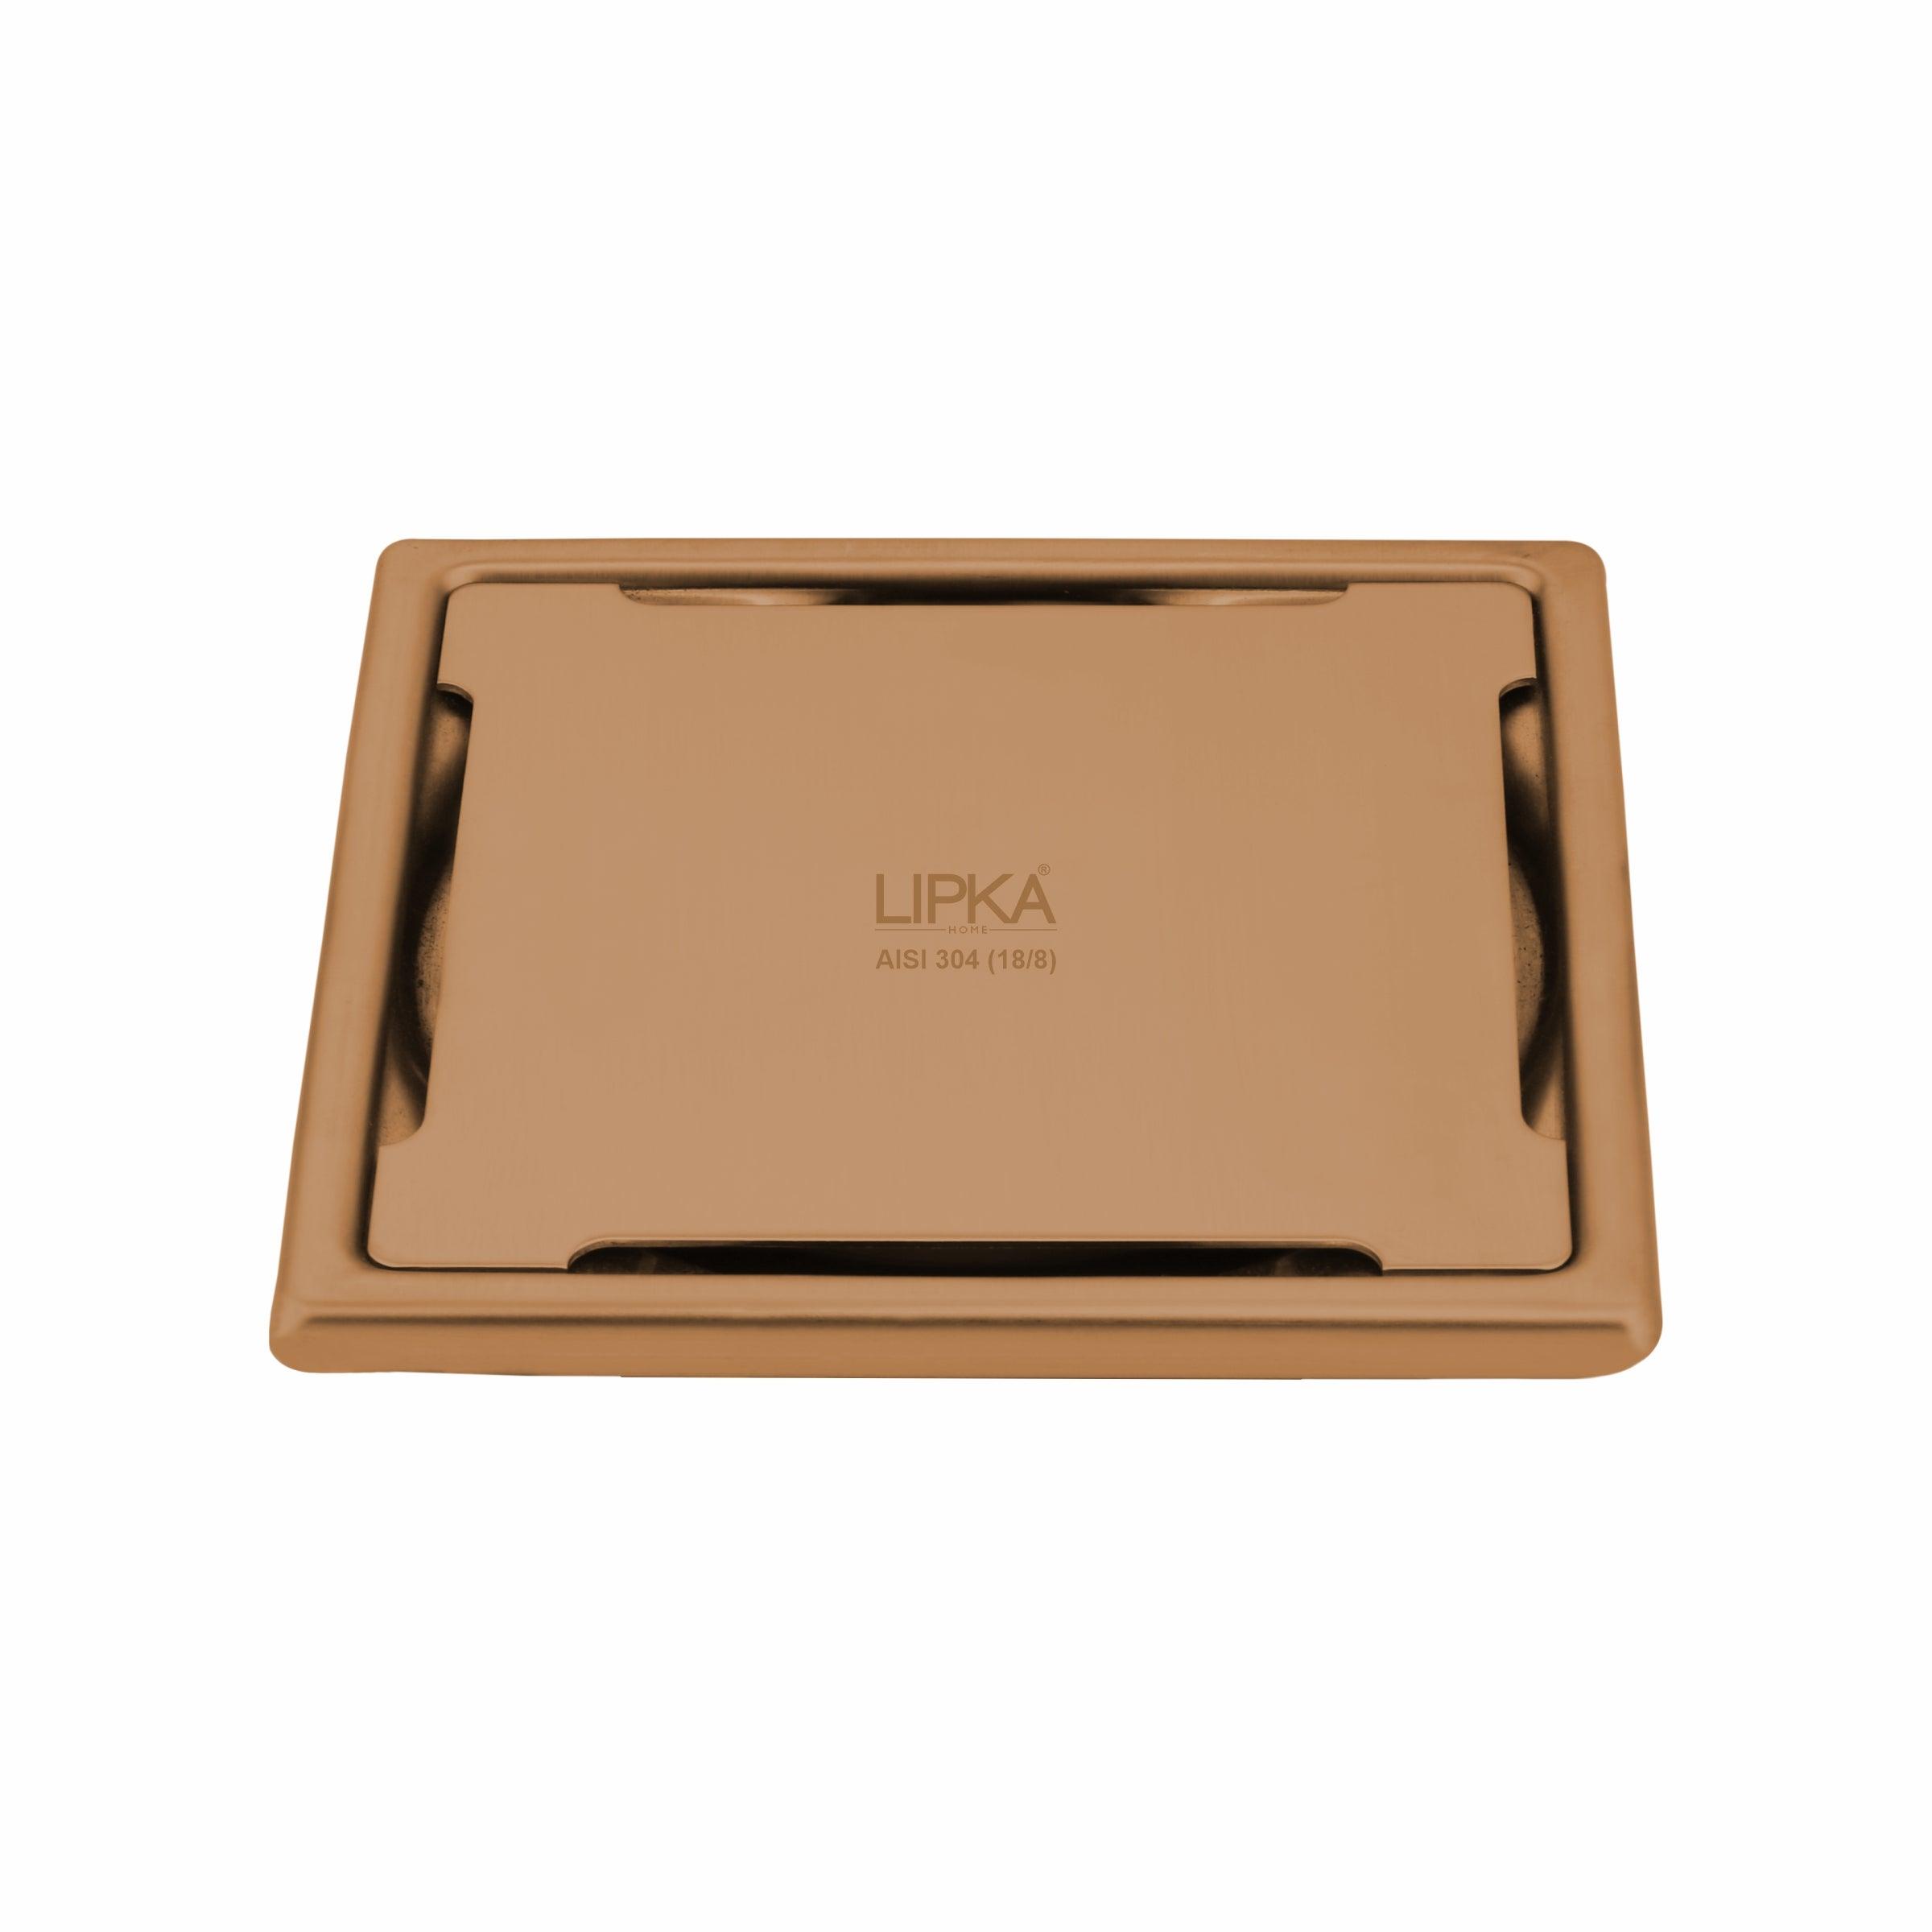 Yellow Exclusive Square Floor Drain in Antique Copper PVD Coating (5 x 5 Inches) - LIPKA